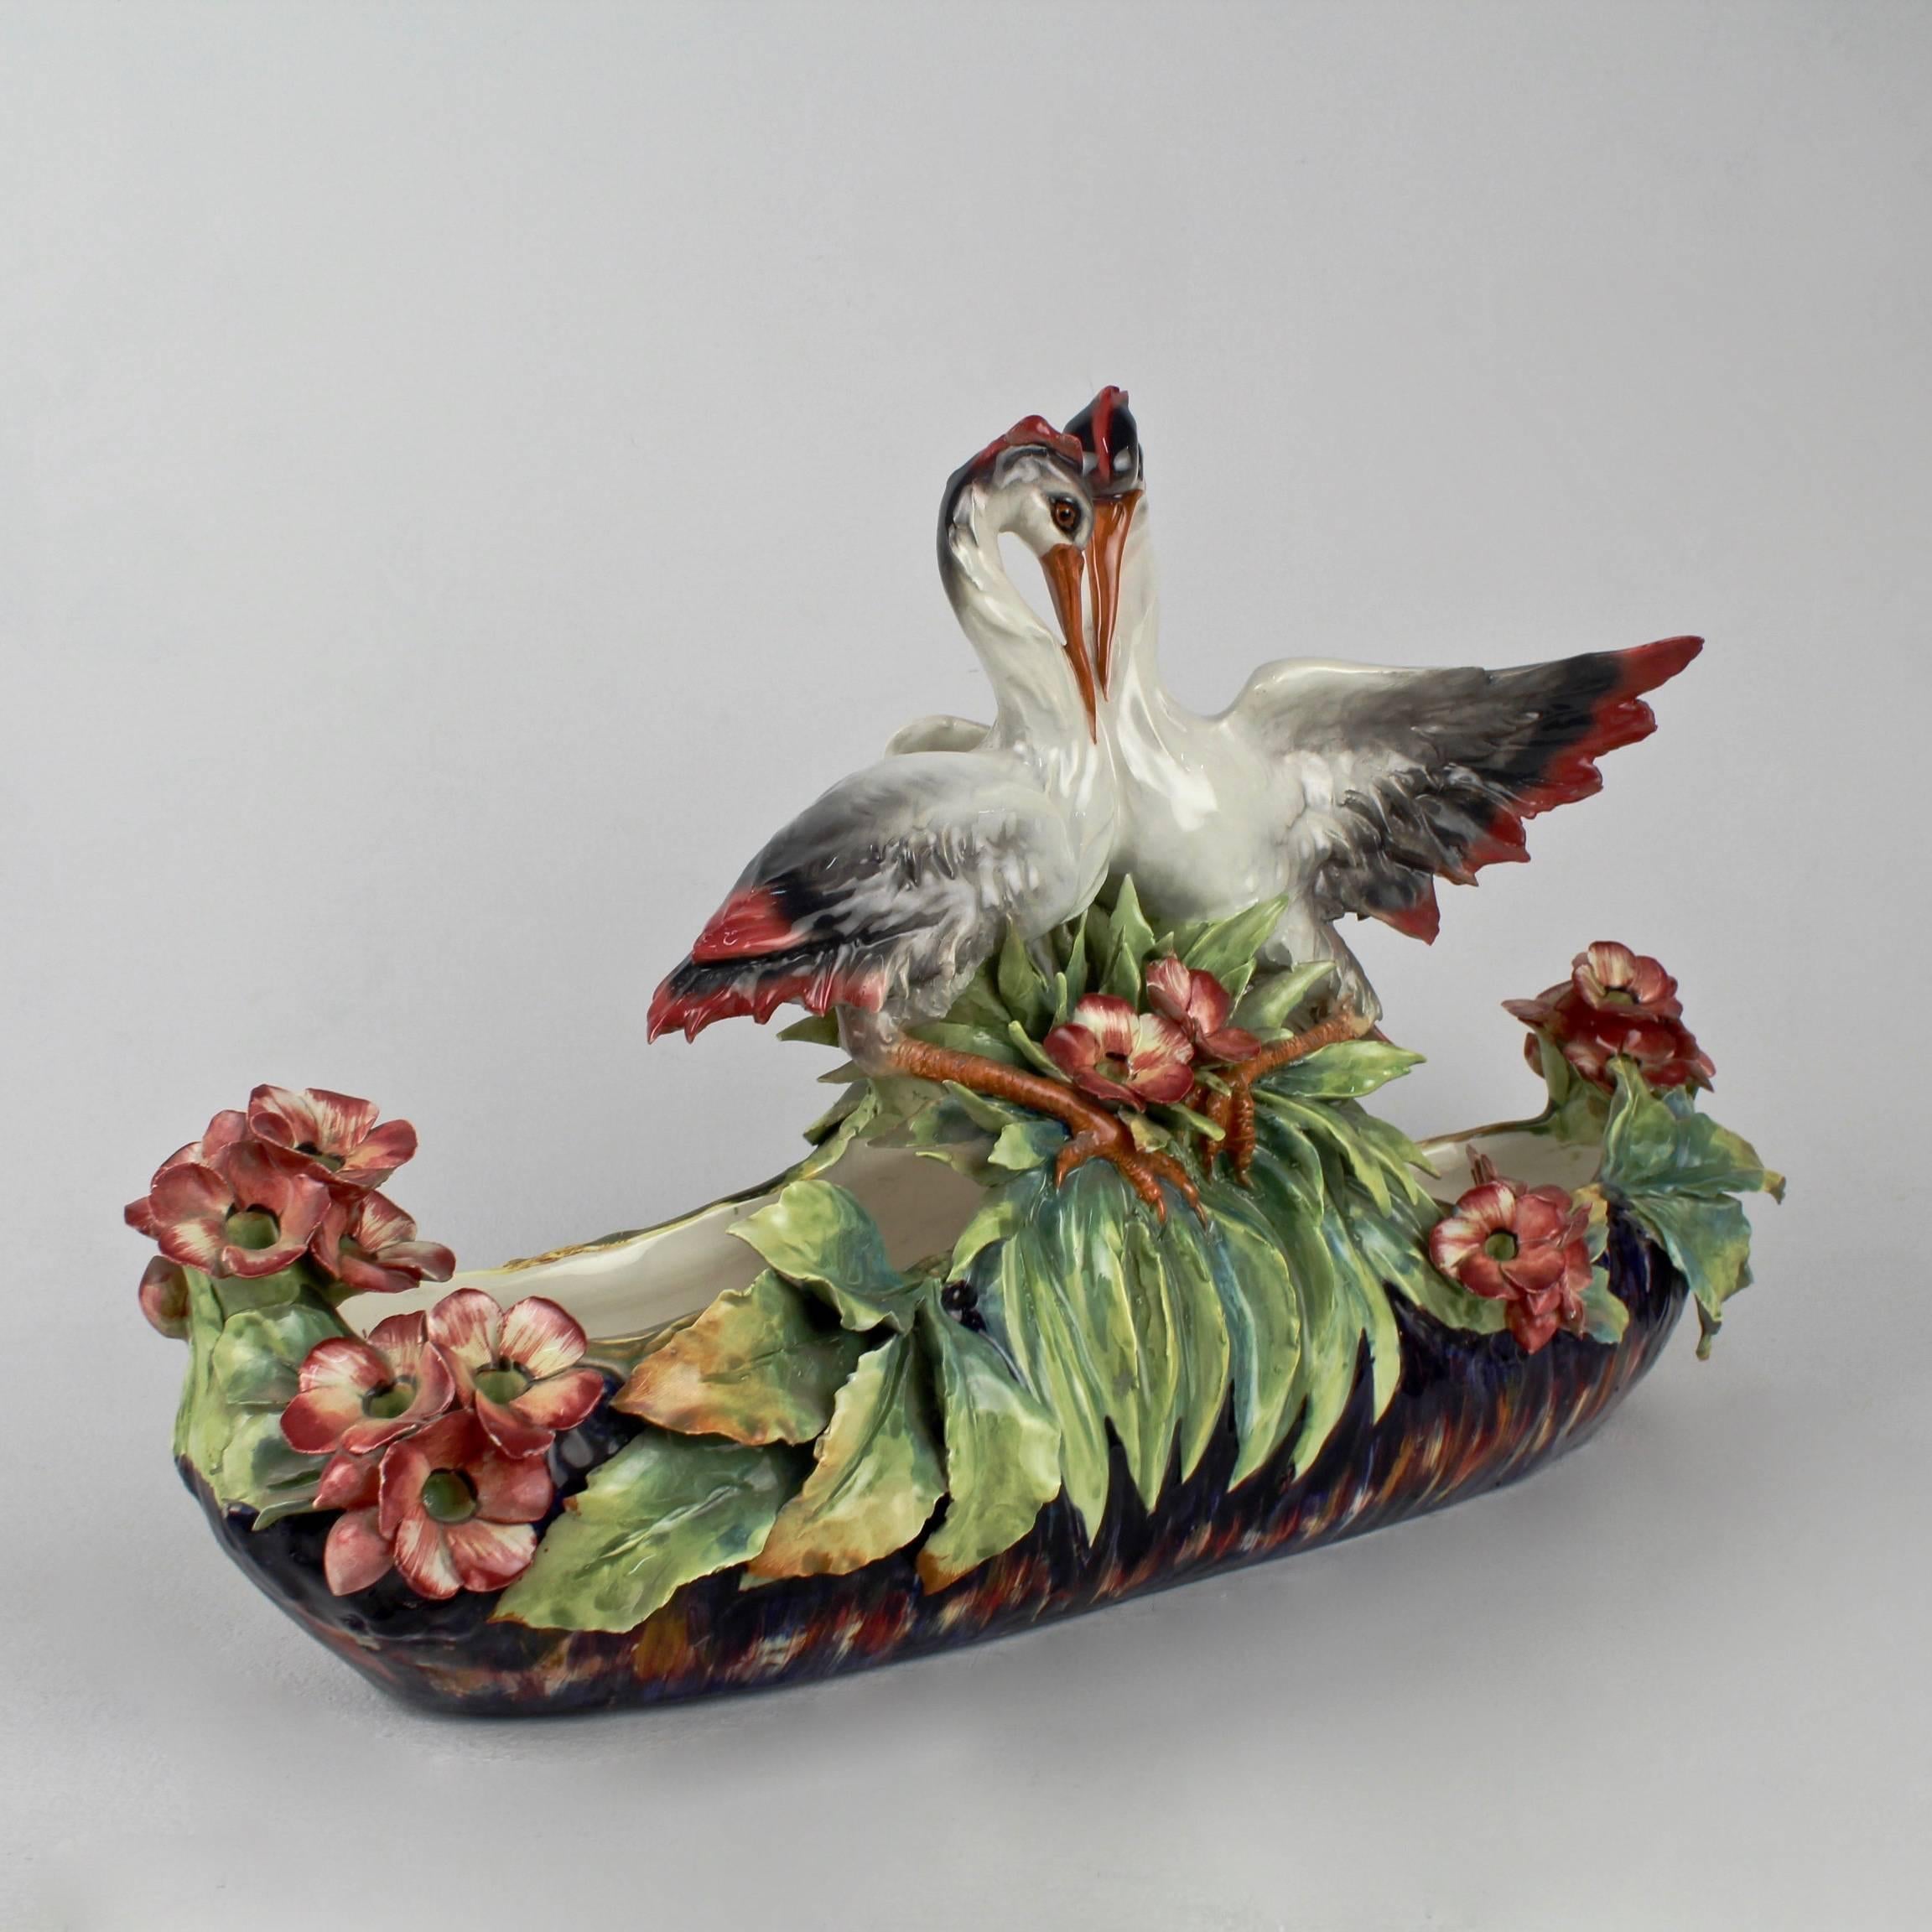 A very large figural Italian Majolica centerpiece by the Mollica Brothers factory.

Two herons rest atop a central handle. Tropical flowers and leafwork surround the rim. Vibrant colors and decoration throughout. 

Signed with an incised